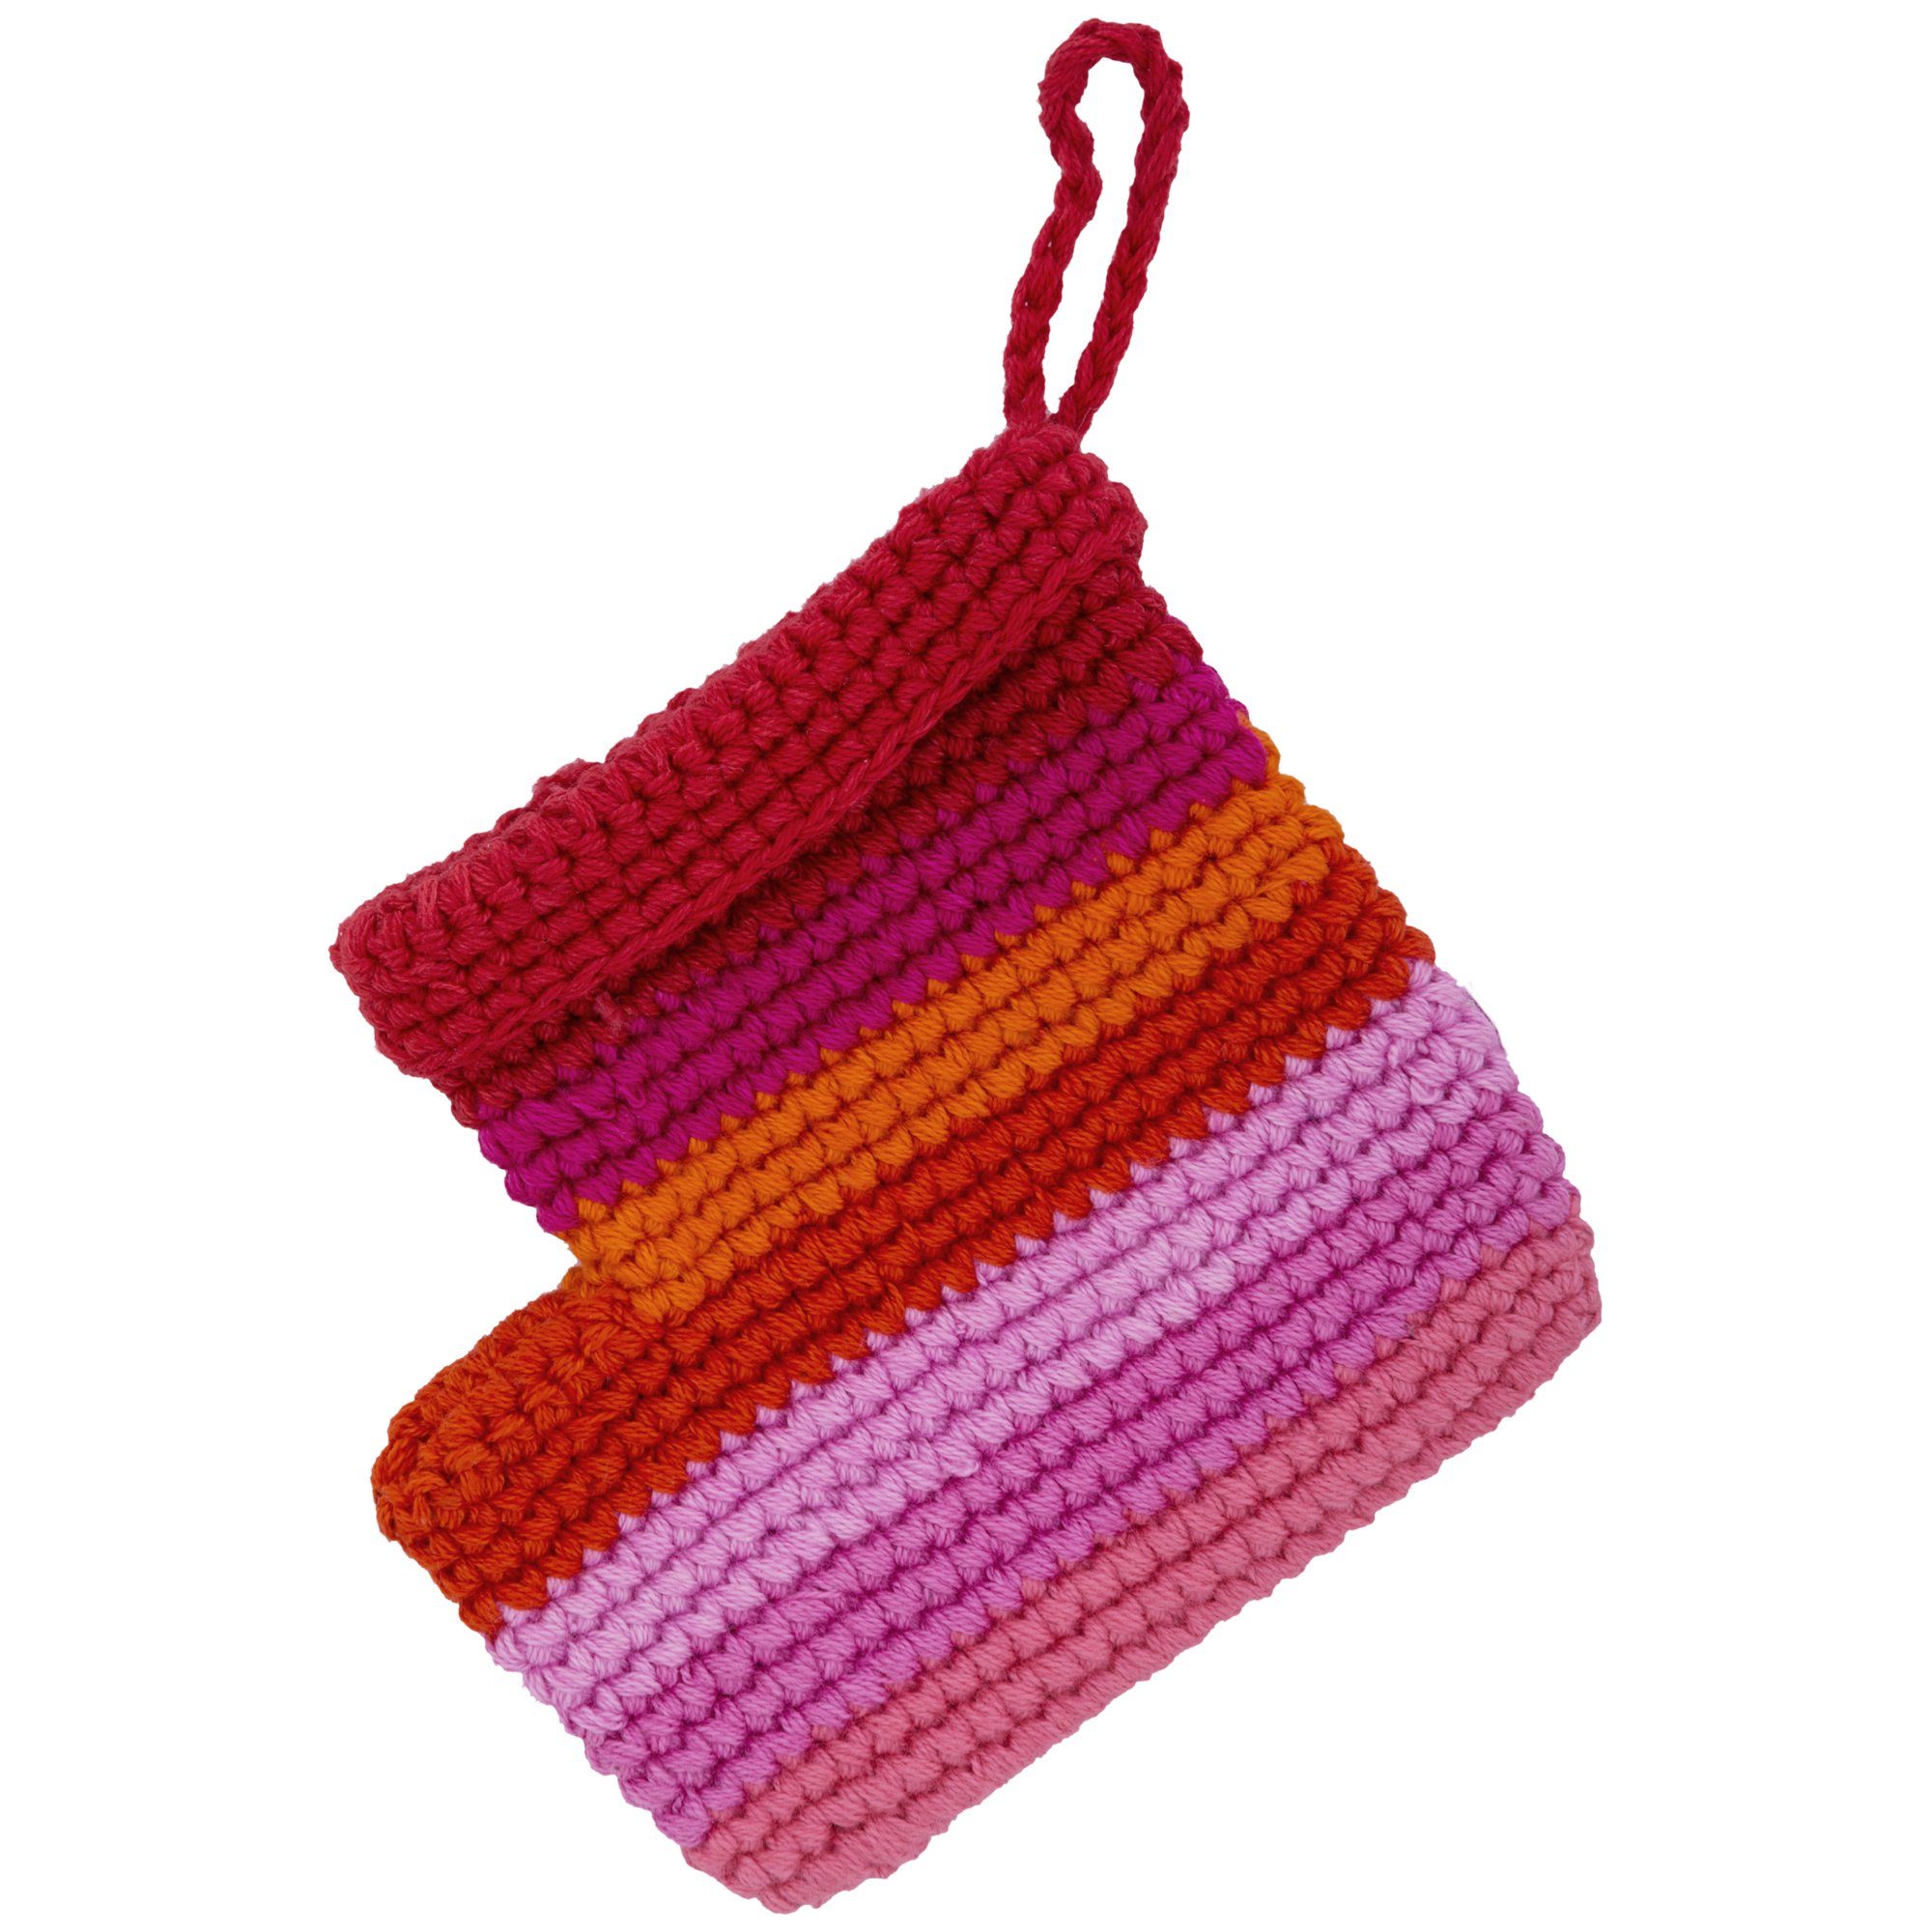 Crochet Stocking Ornament - Pink/Red